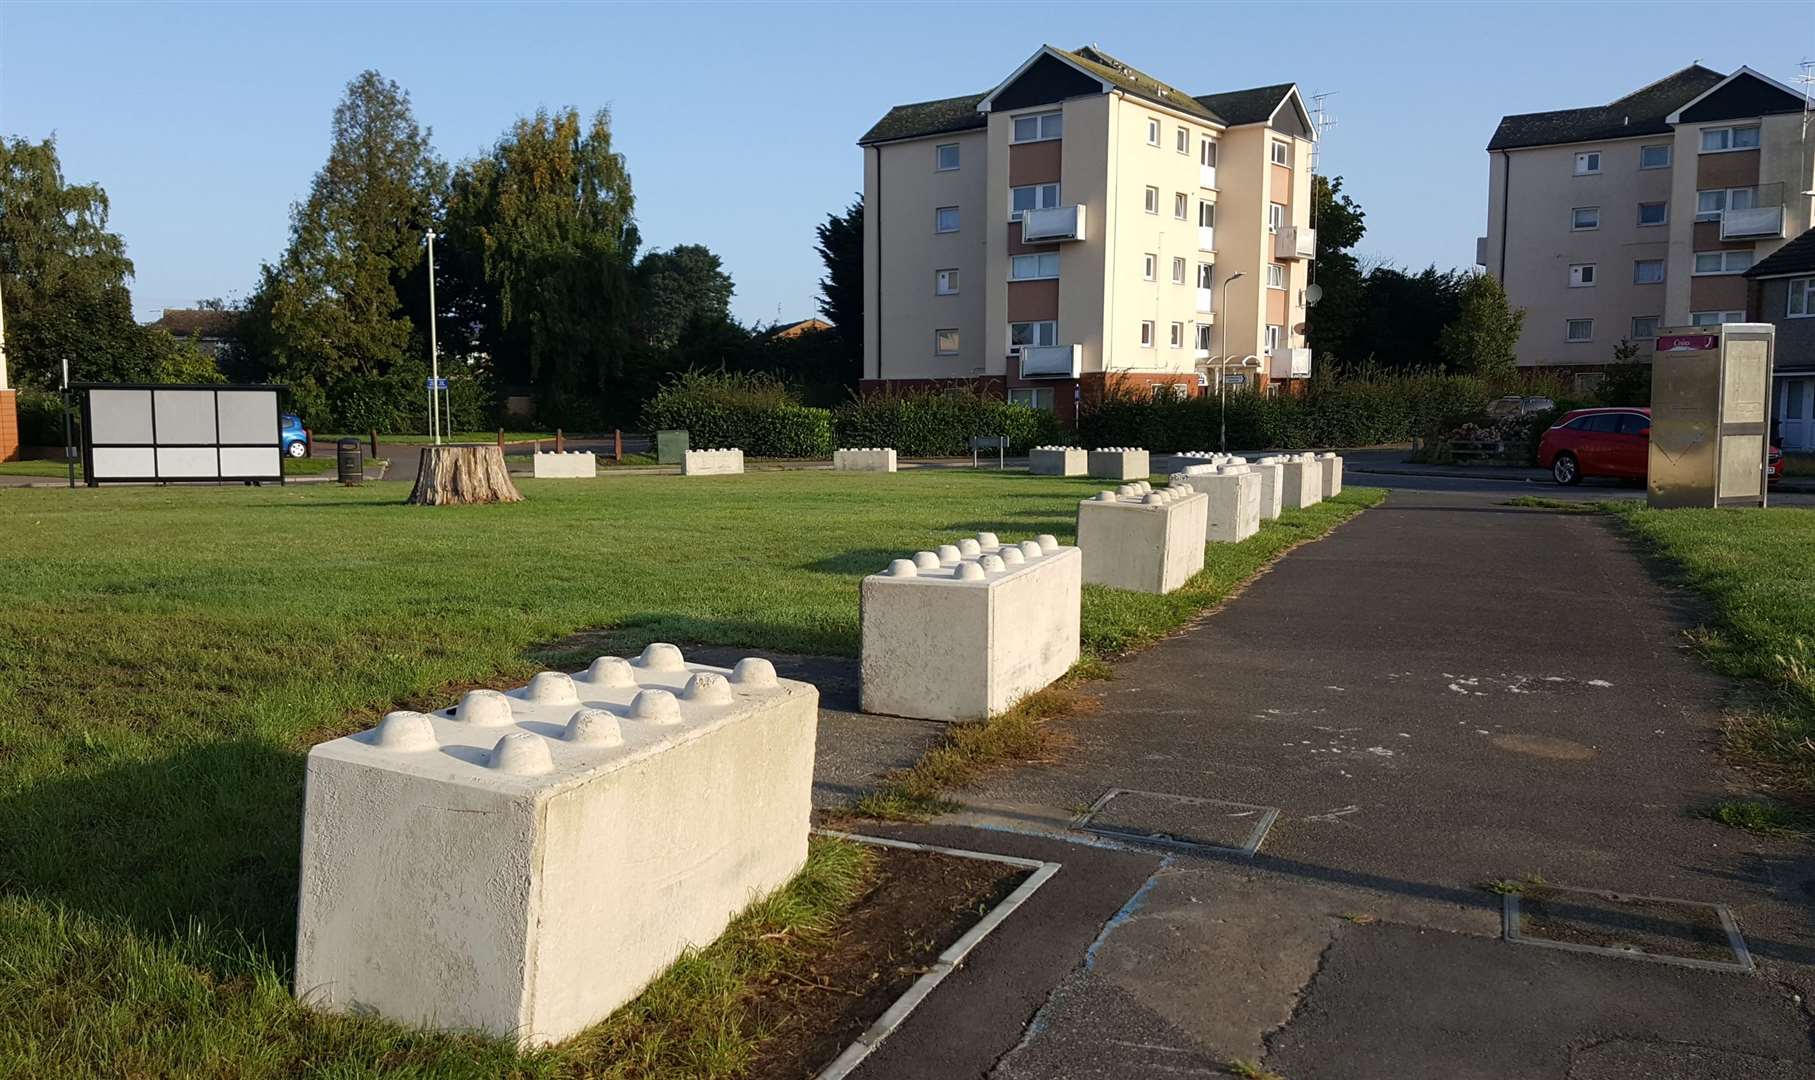 Large concrete blocks have appeared around a field in Bockhanger, with many likening them to Lego bricks